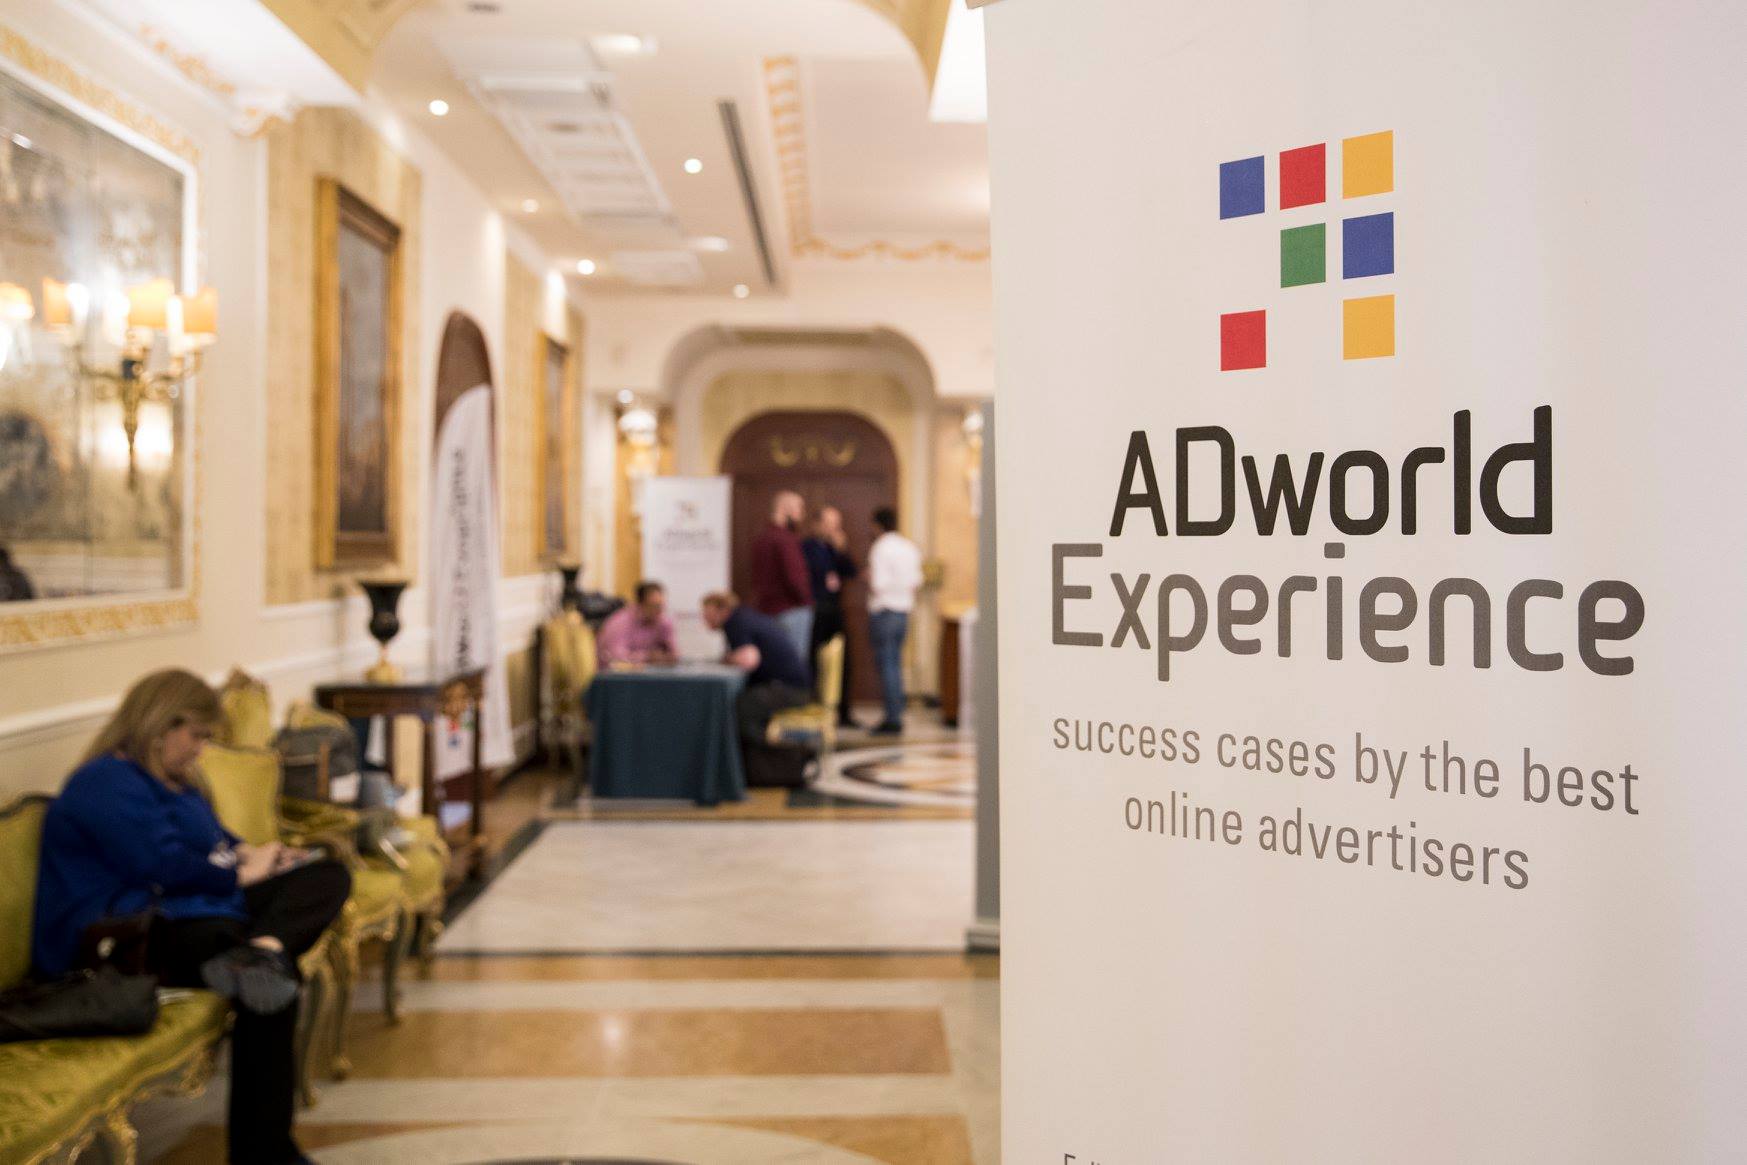 ADWorld Experience 2022: Acquista i Tickets in Promo Early Birds!